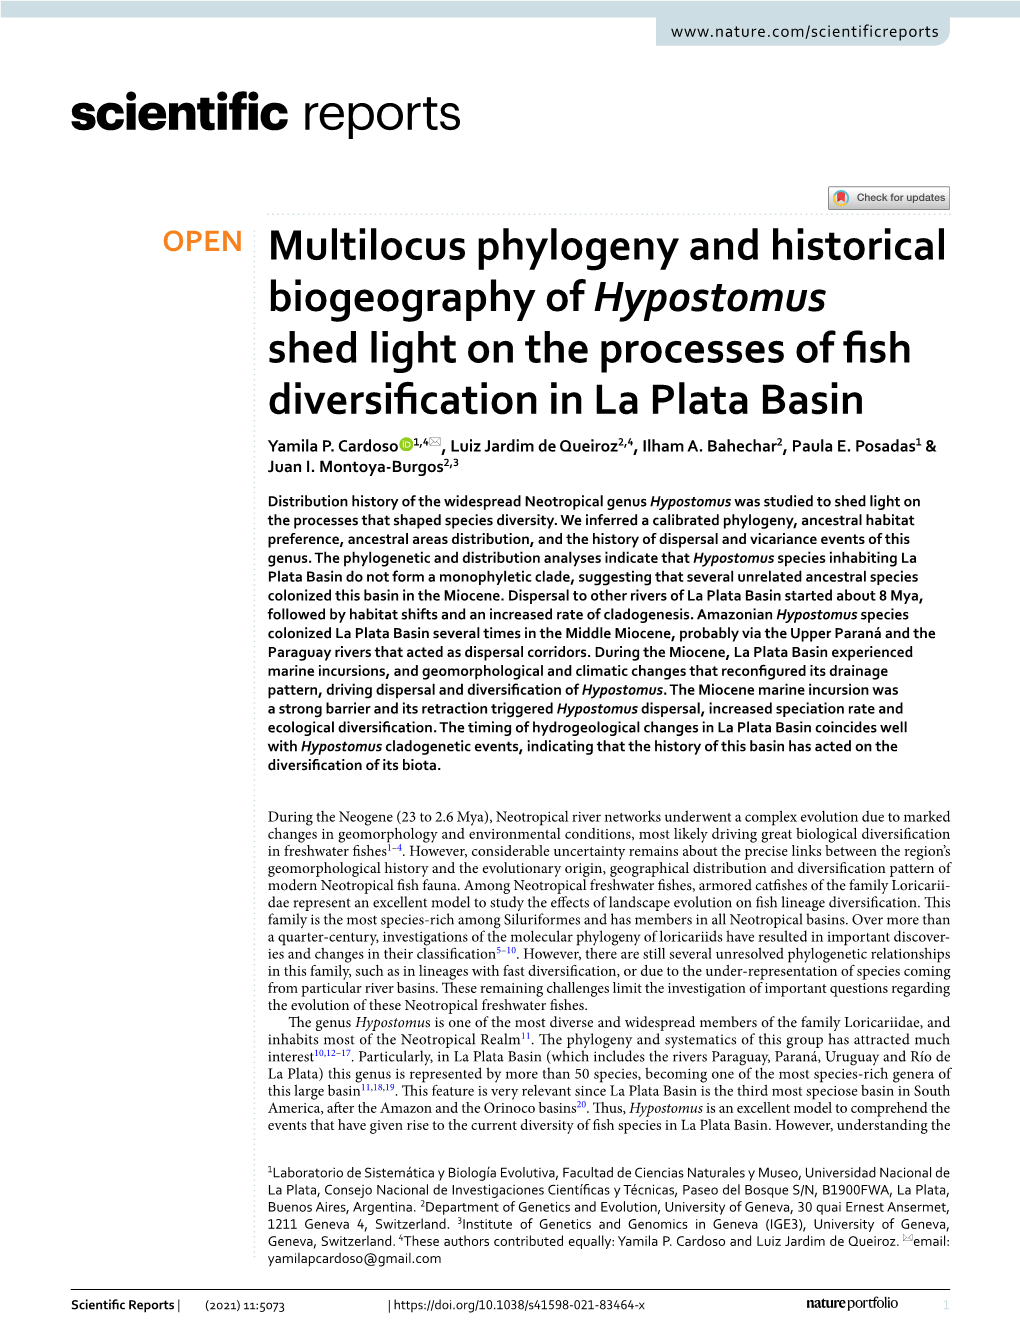 Multilocus Phylogeny and Historical Biogeography of Hypostomus Shed Light on the Processes of Fsh Diversifcation in La Plata Basin Yamila P